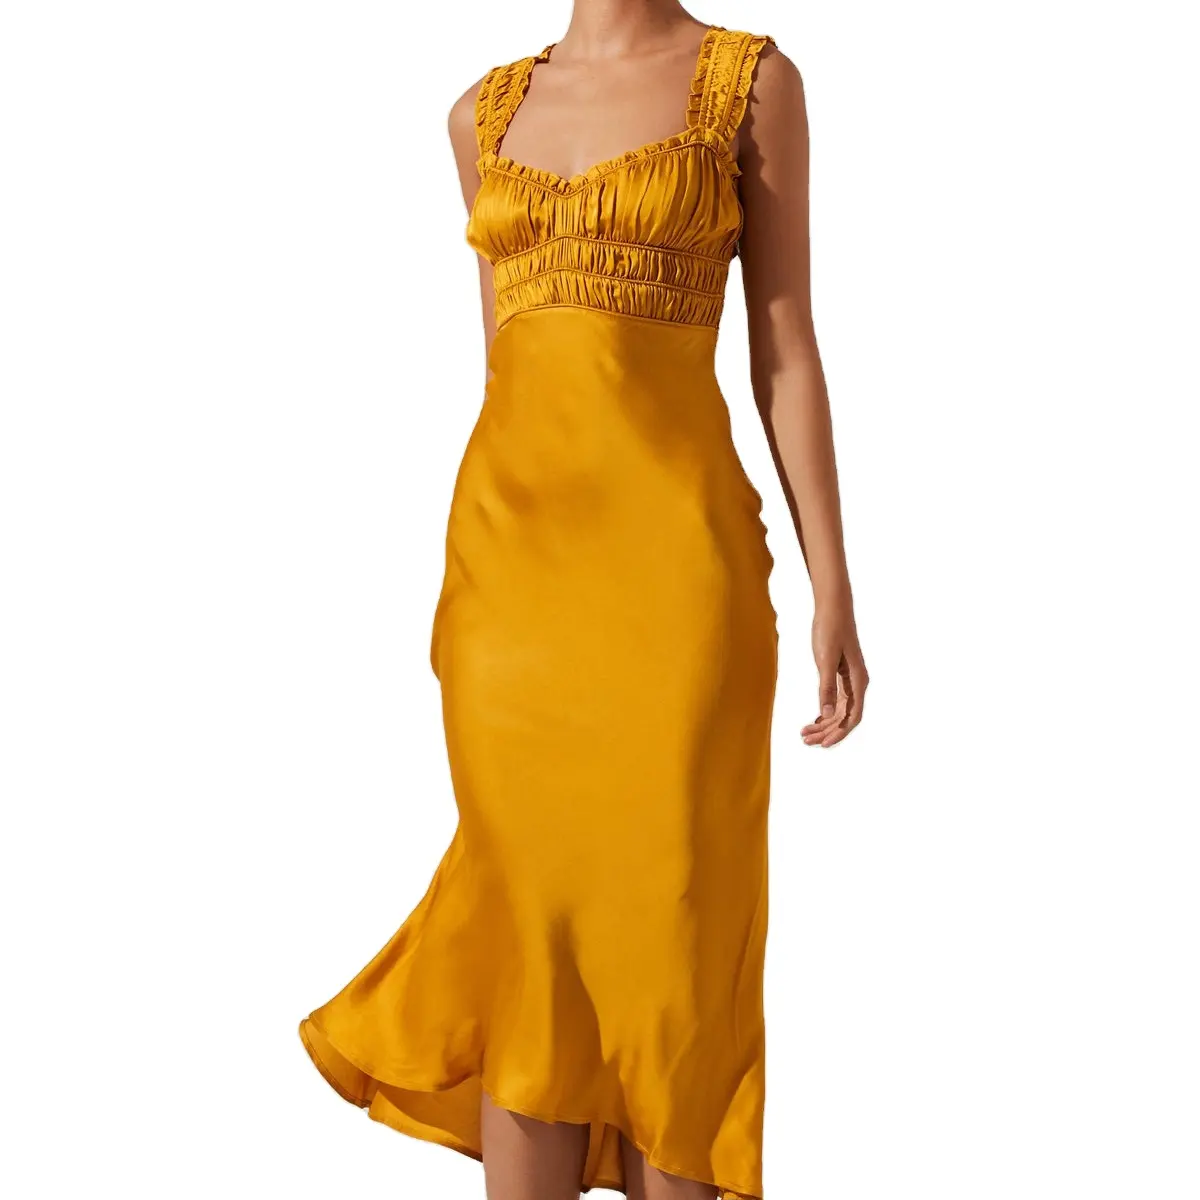 Hot Elegant Front Pleated Square Collar Backless Yellow Ladies Sexy Dress Satin Smocked Midi Dress